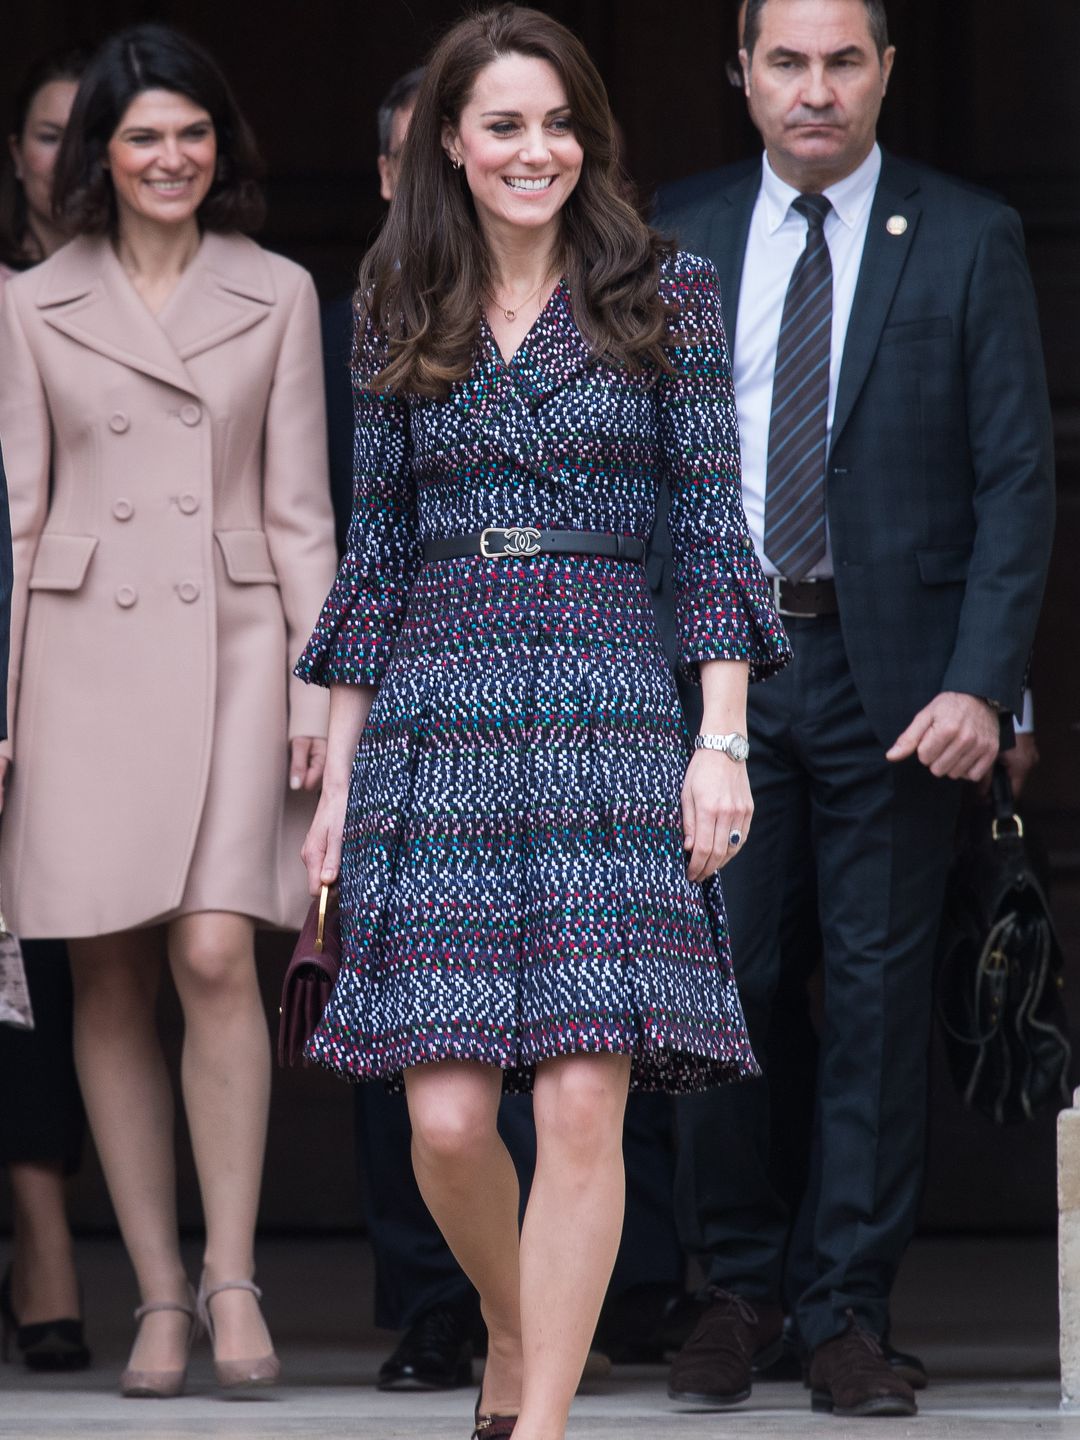 Catherine, Duchess of Cambridge visits the Invalides on March 18, 2017 wearing Chanel